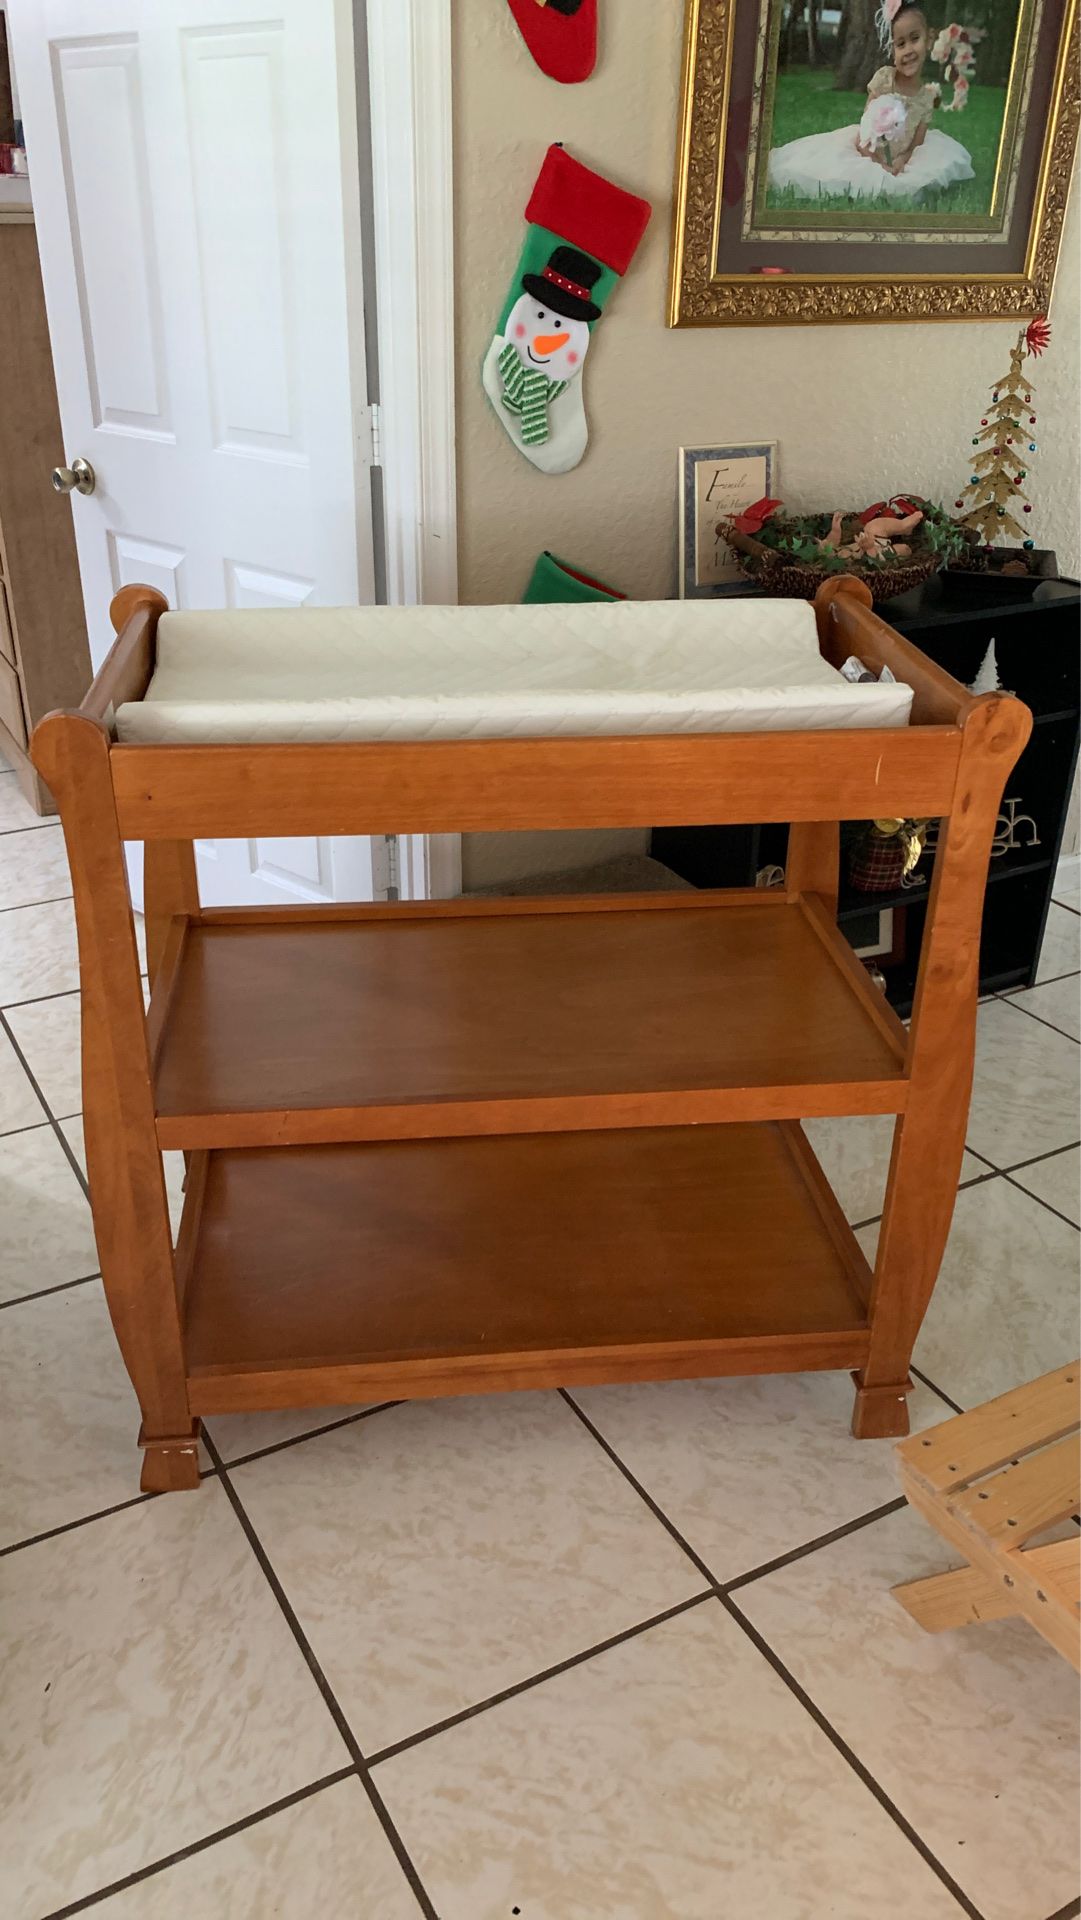 Changing table for babies